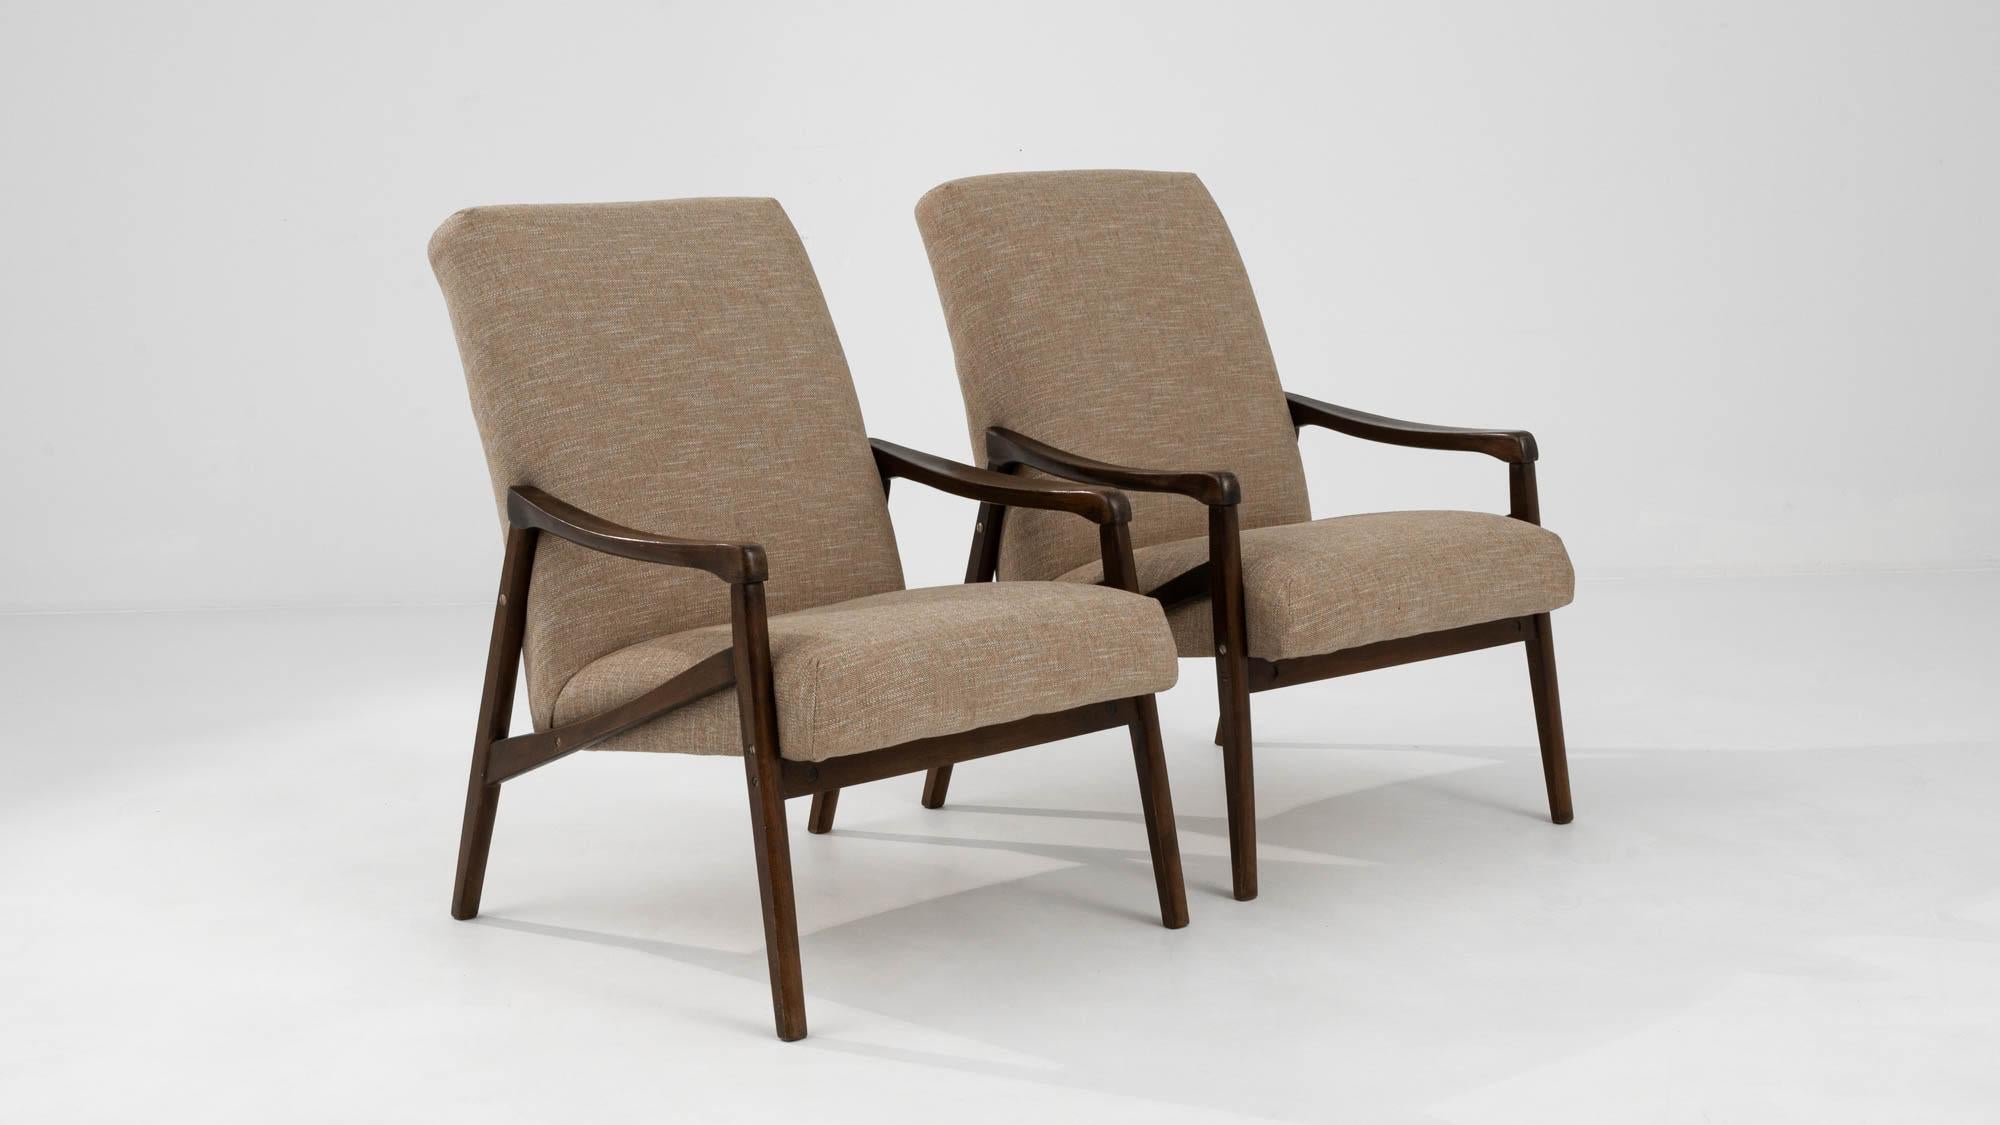 1960s Czech Upholstered Armchairs By Jiri Jiroutek, a Pair For Sale 4